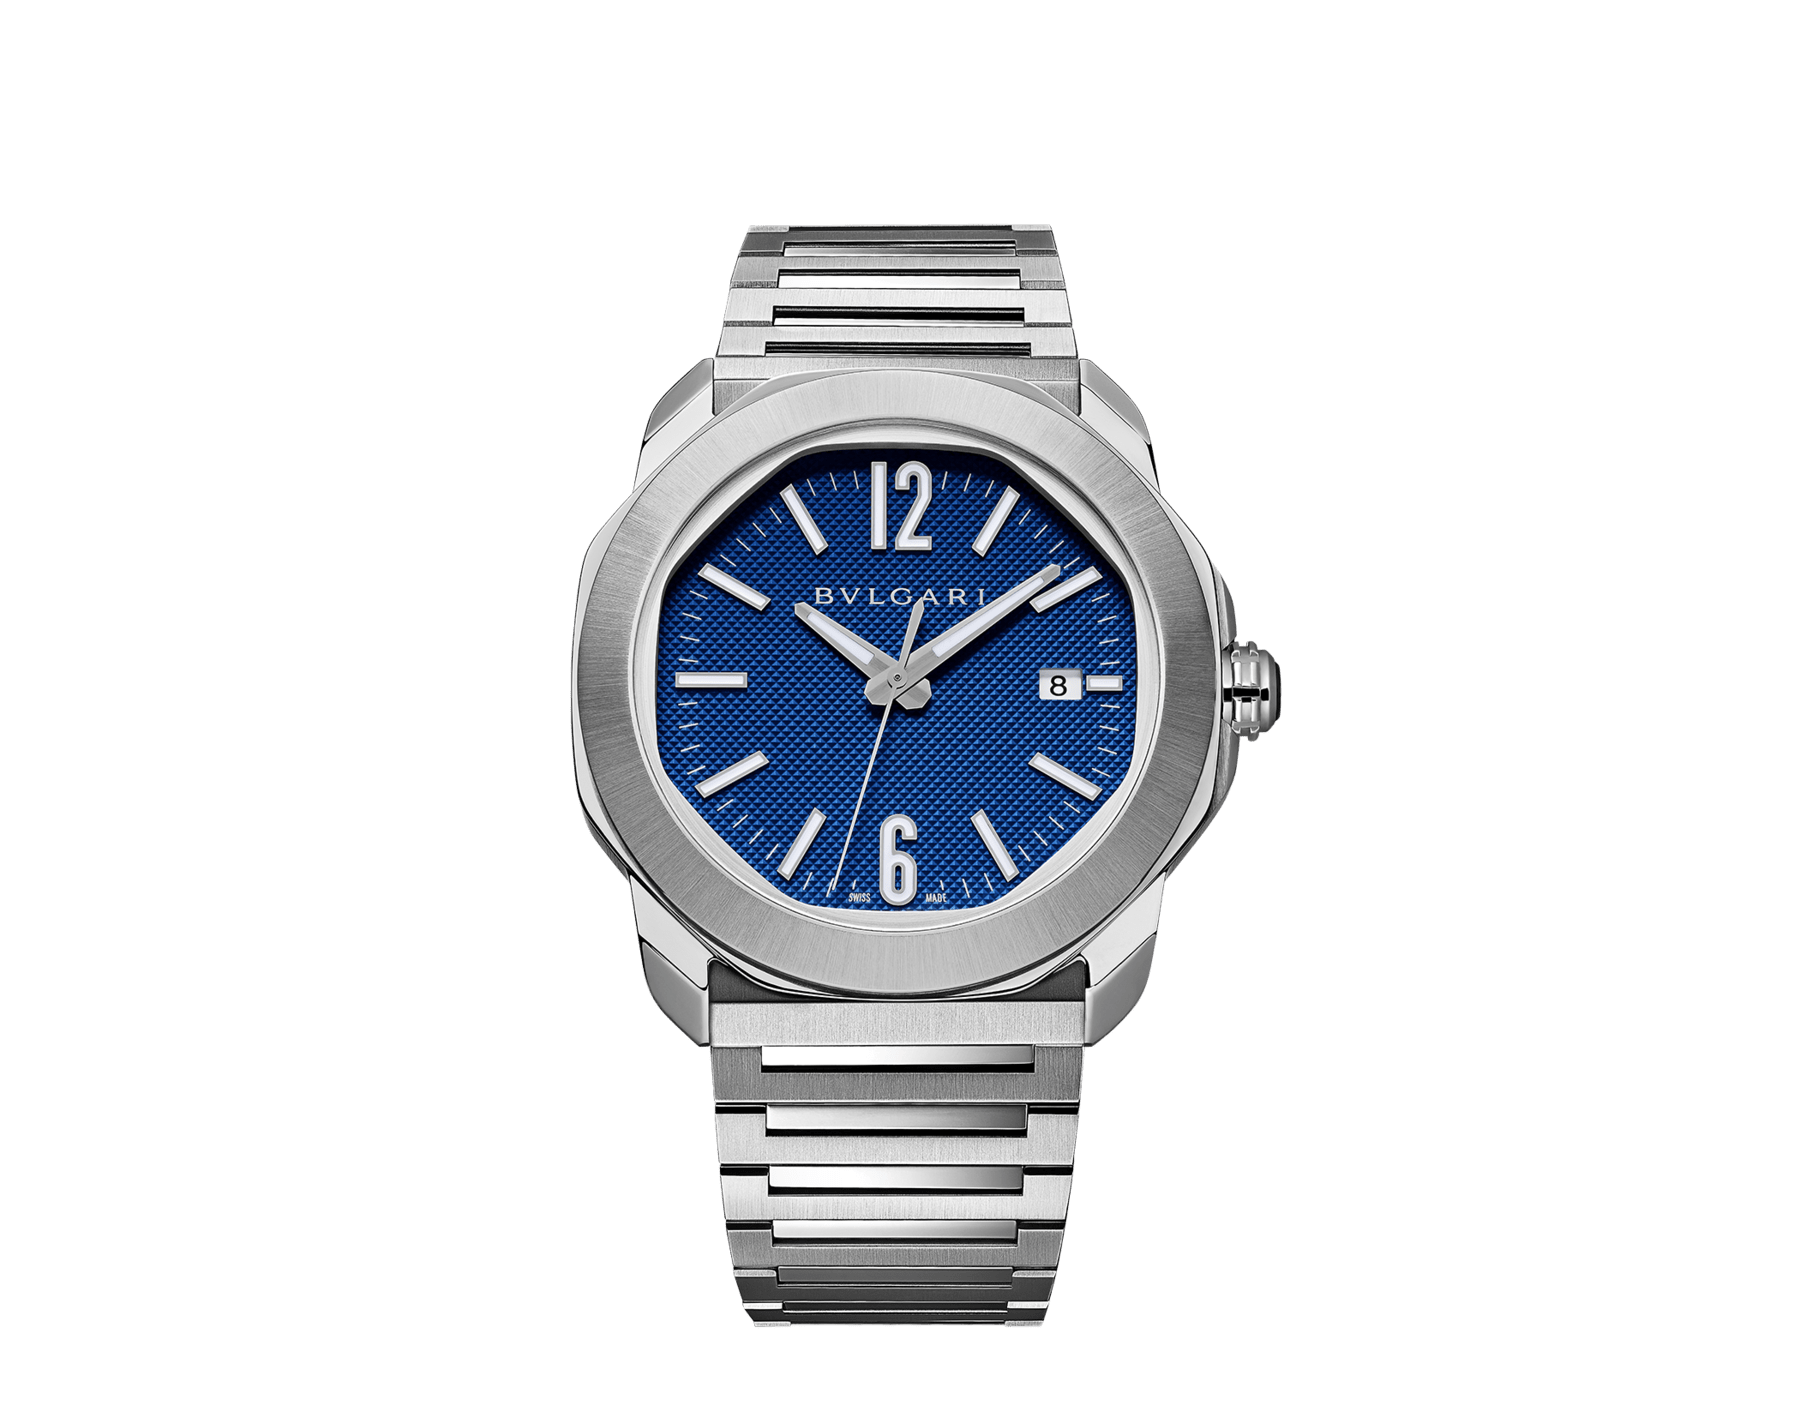 Octo Roma Automatic watch with mechanical manufacture movement, automatic winding, satin-brushed and polished stainless steel case and interchangeable bracelet, blue Clous de Paris dial. Water-resistant up to 100 meters. 103739 image 1